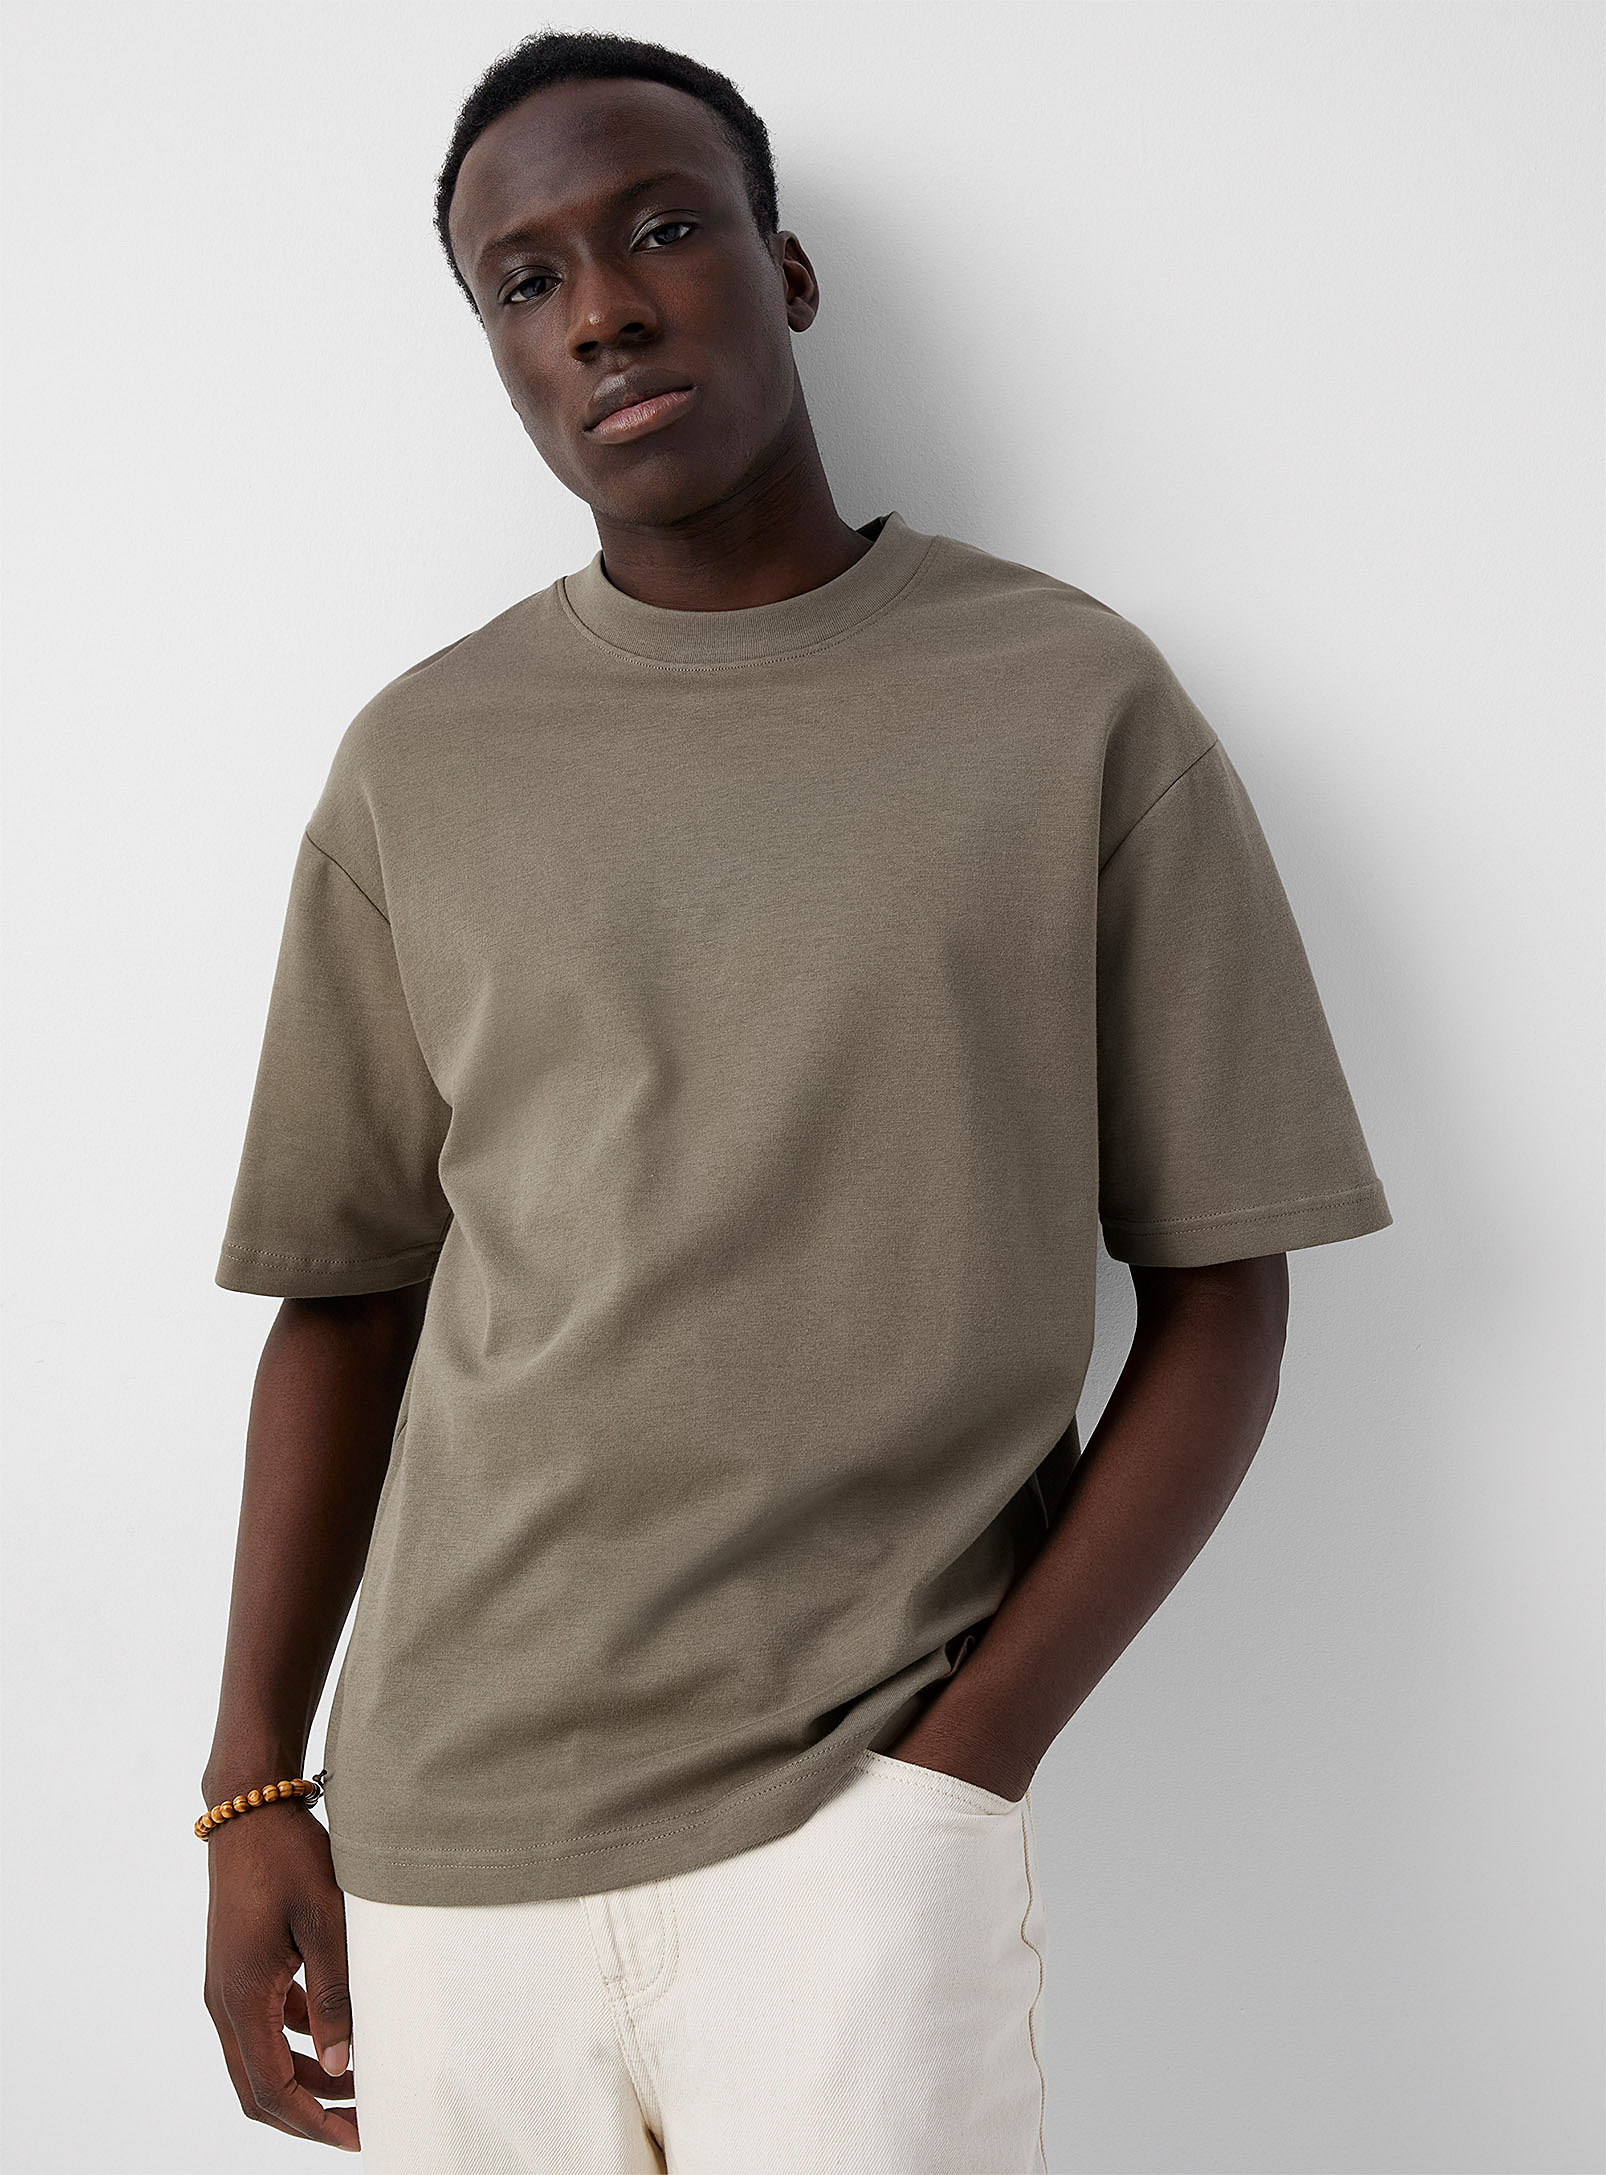 Selected Minimalist T-shirt In Mossy Green